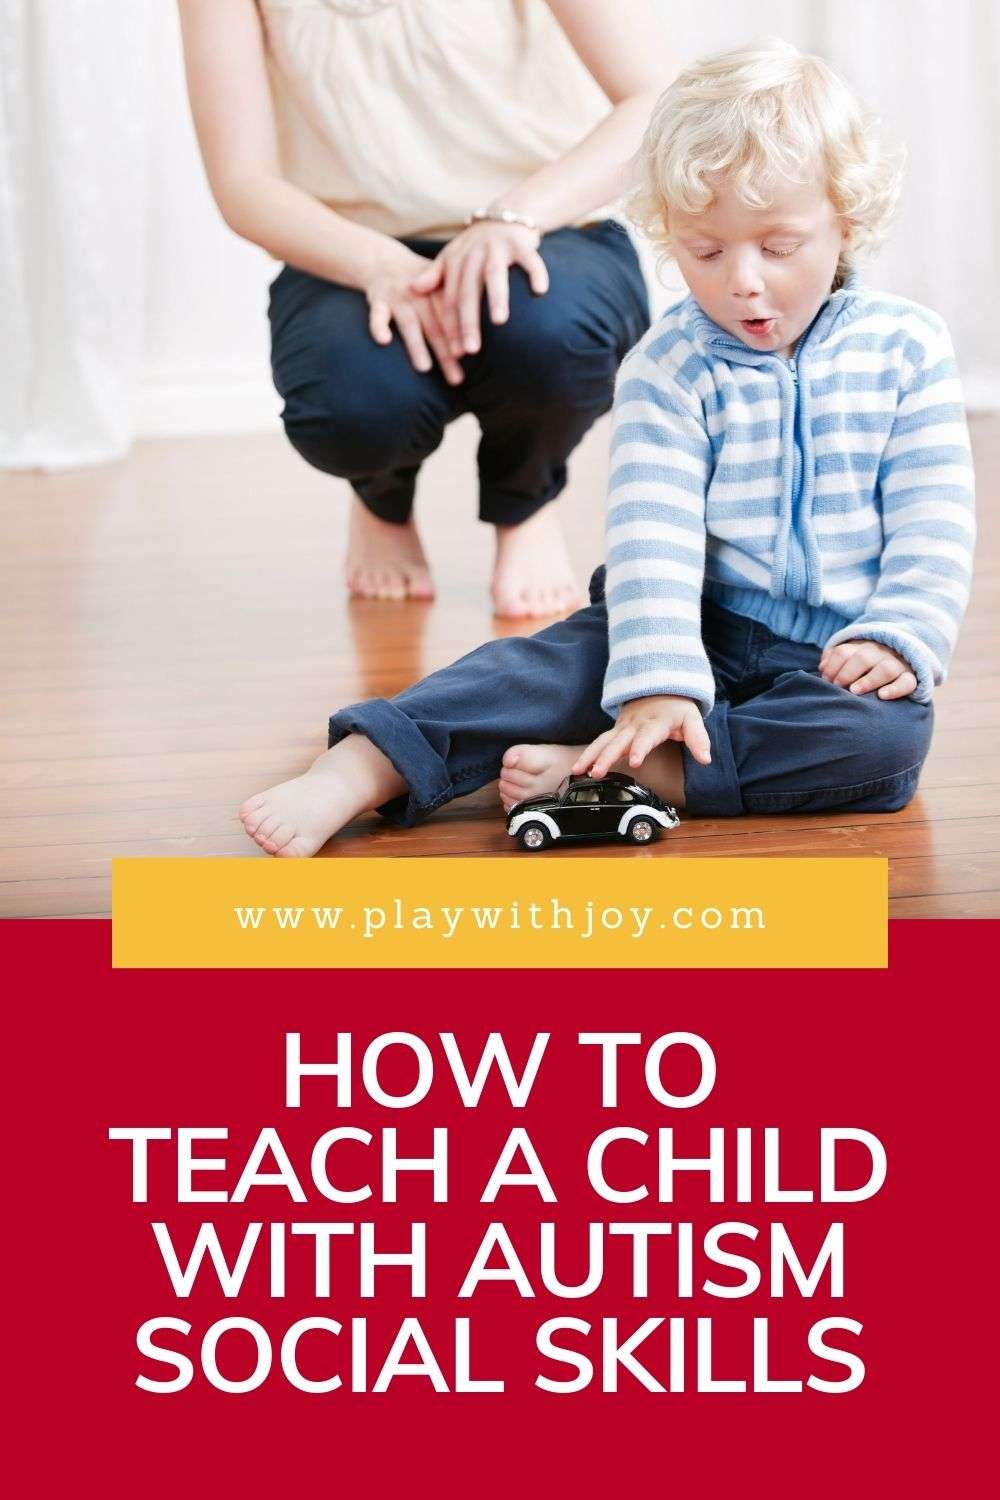 How To Teach A Child With Autism: SOCIAL SKILLS  Play With Joy, LLC